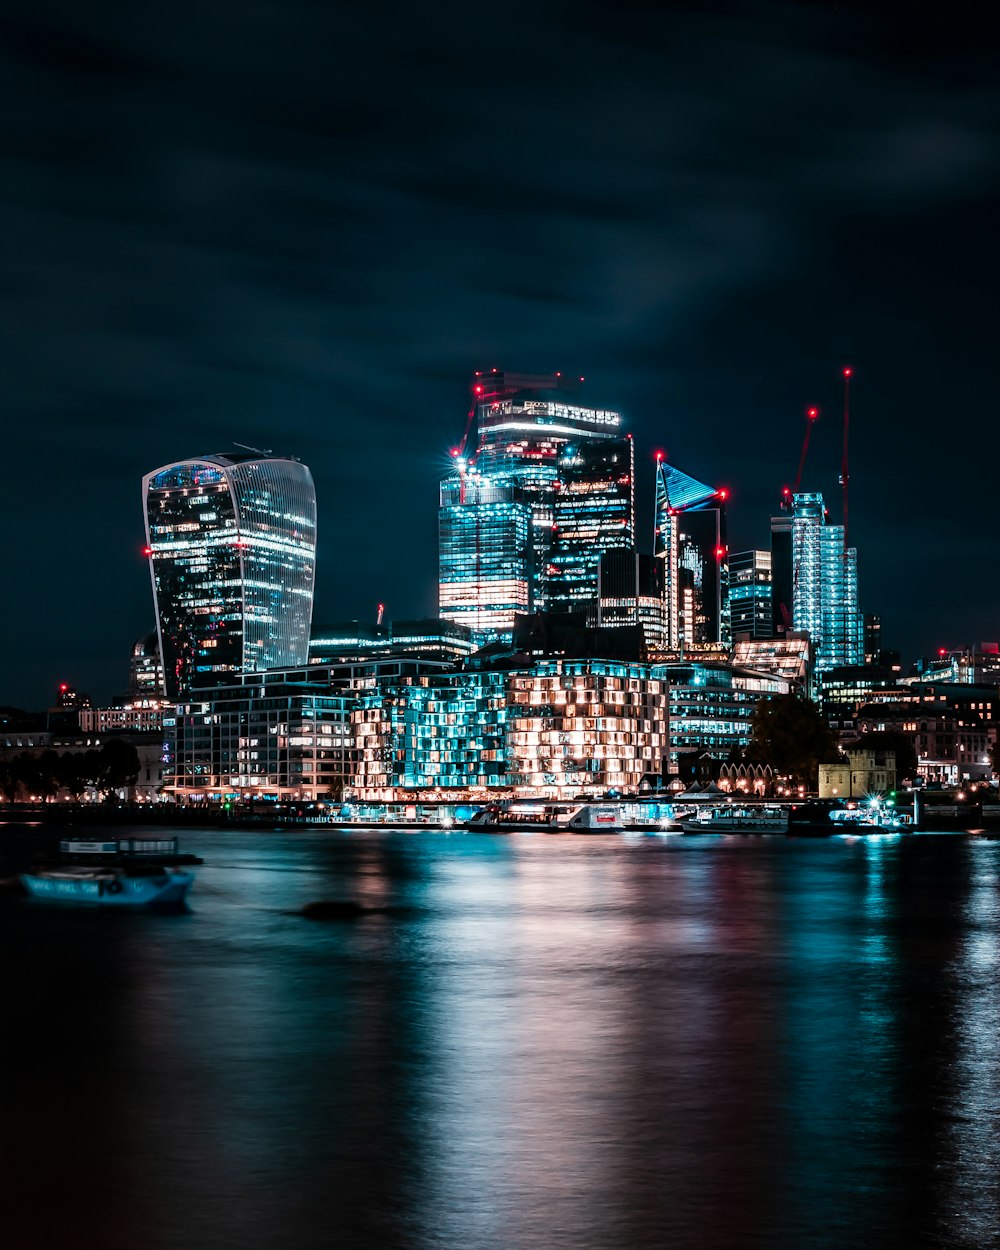 the city of london at night is lit up